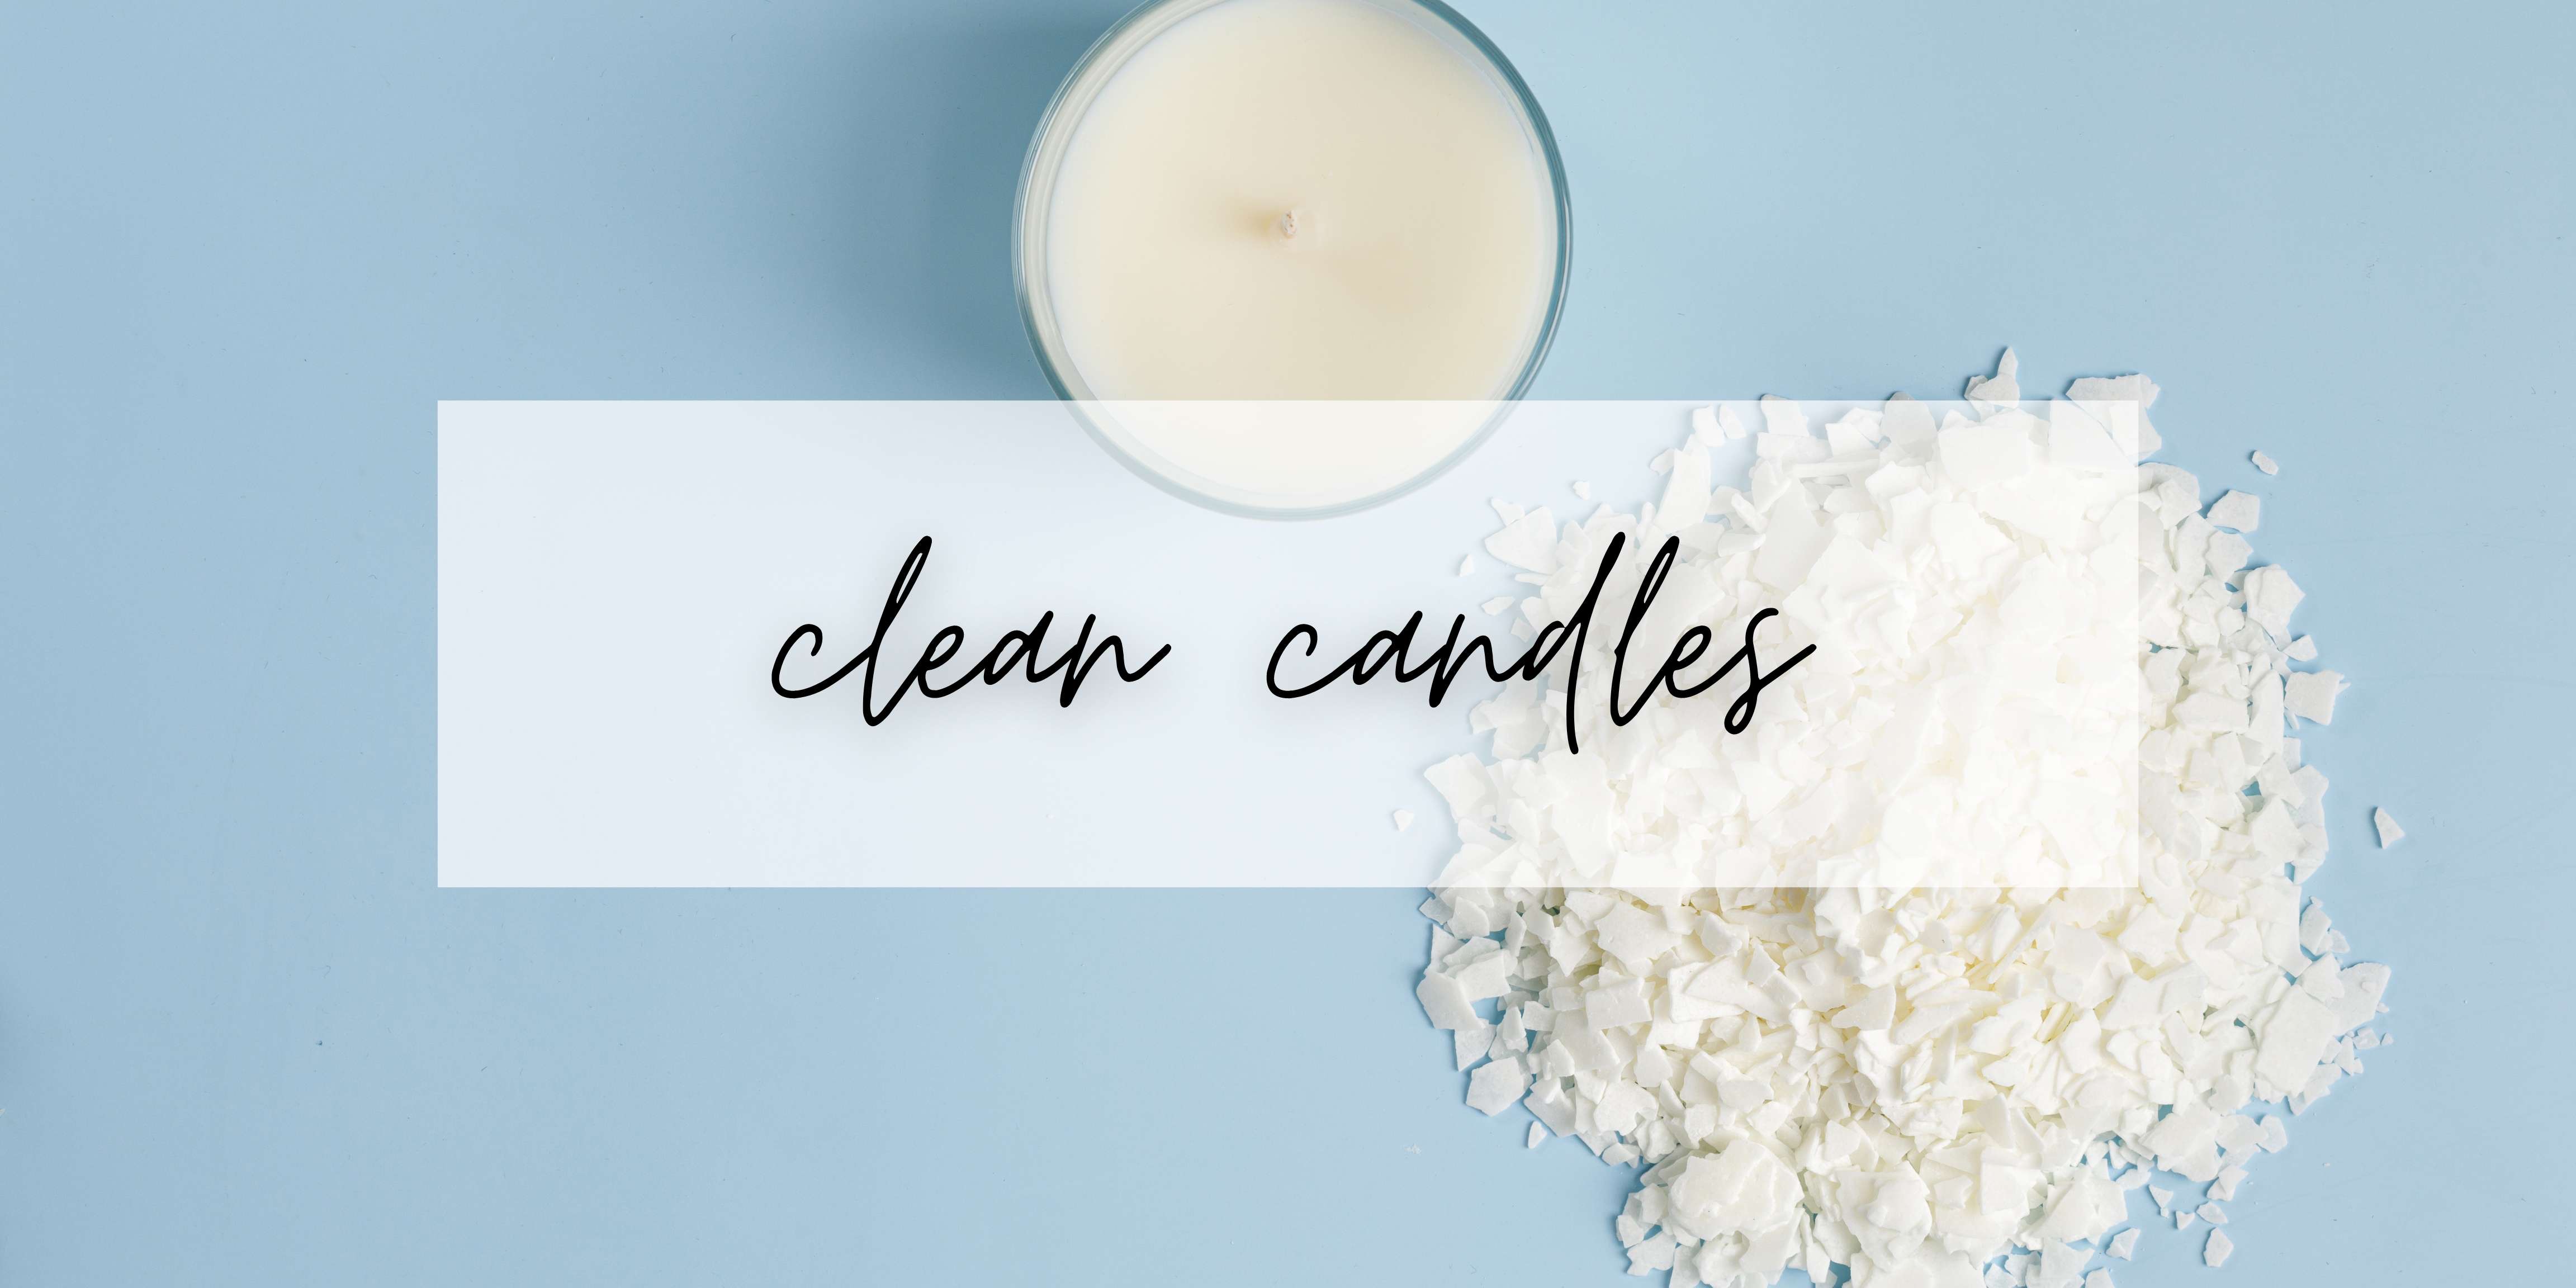 What does "Clean Candles" mean?